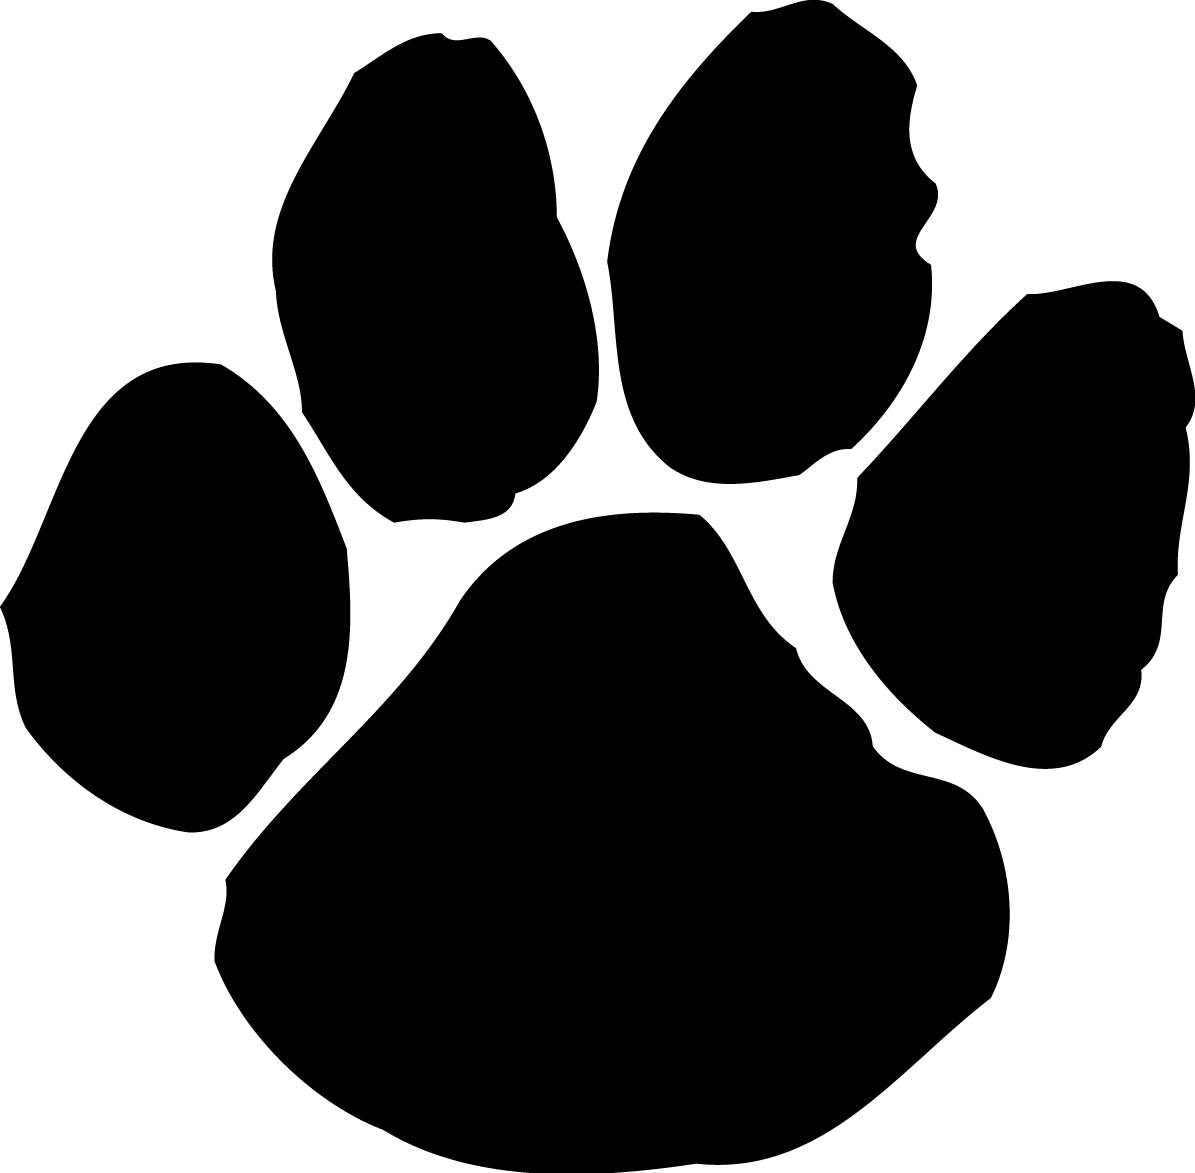 Clipart Of Dog Paws. Paw print tattoos on dog paw .